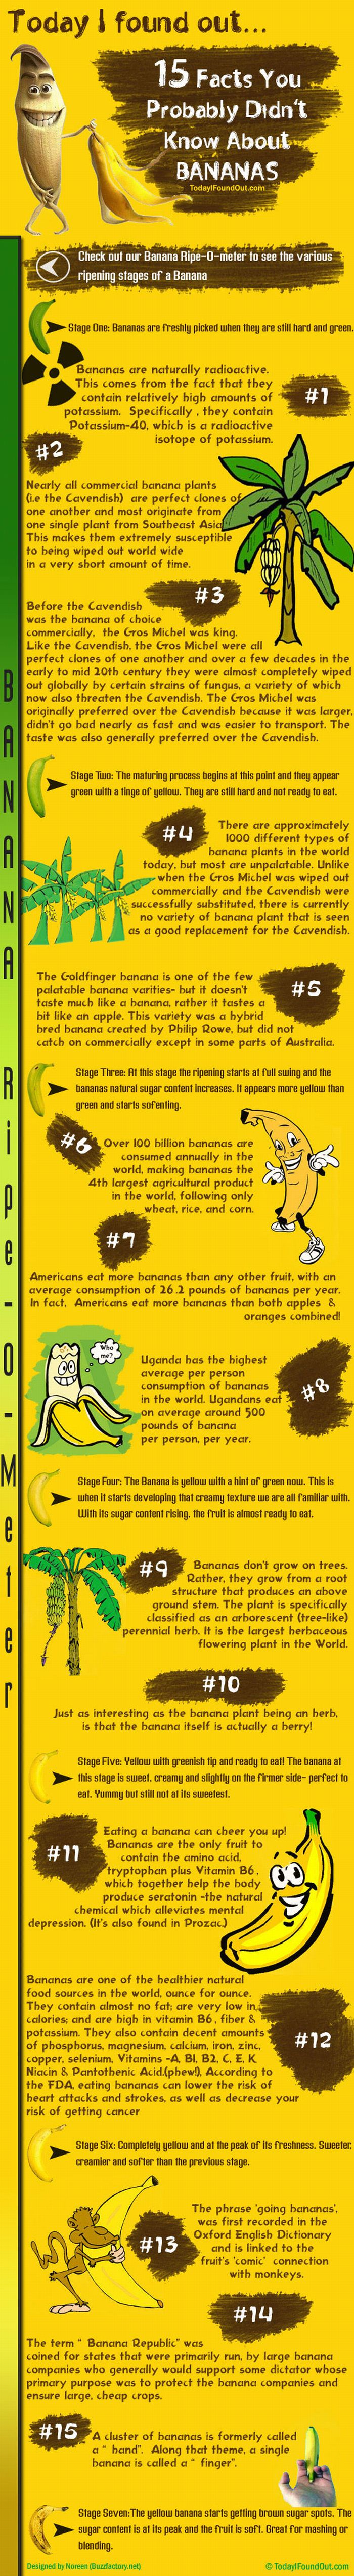 15 Facts You Probably Didn’t Know About Bananas (infographic)